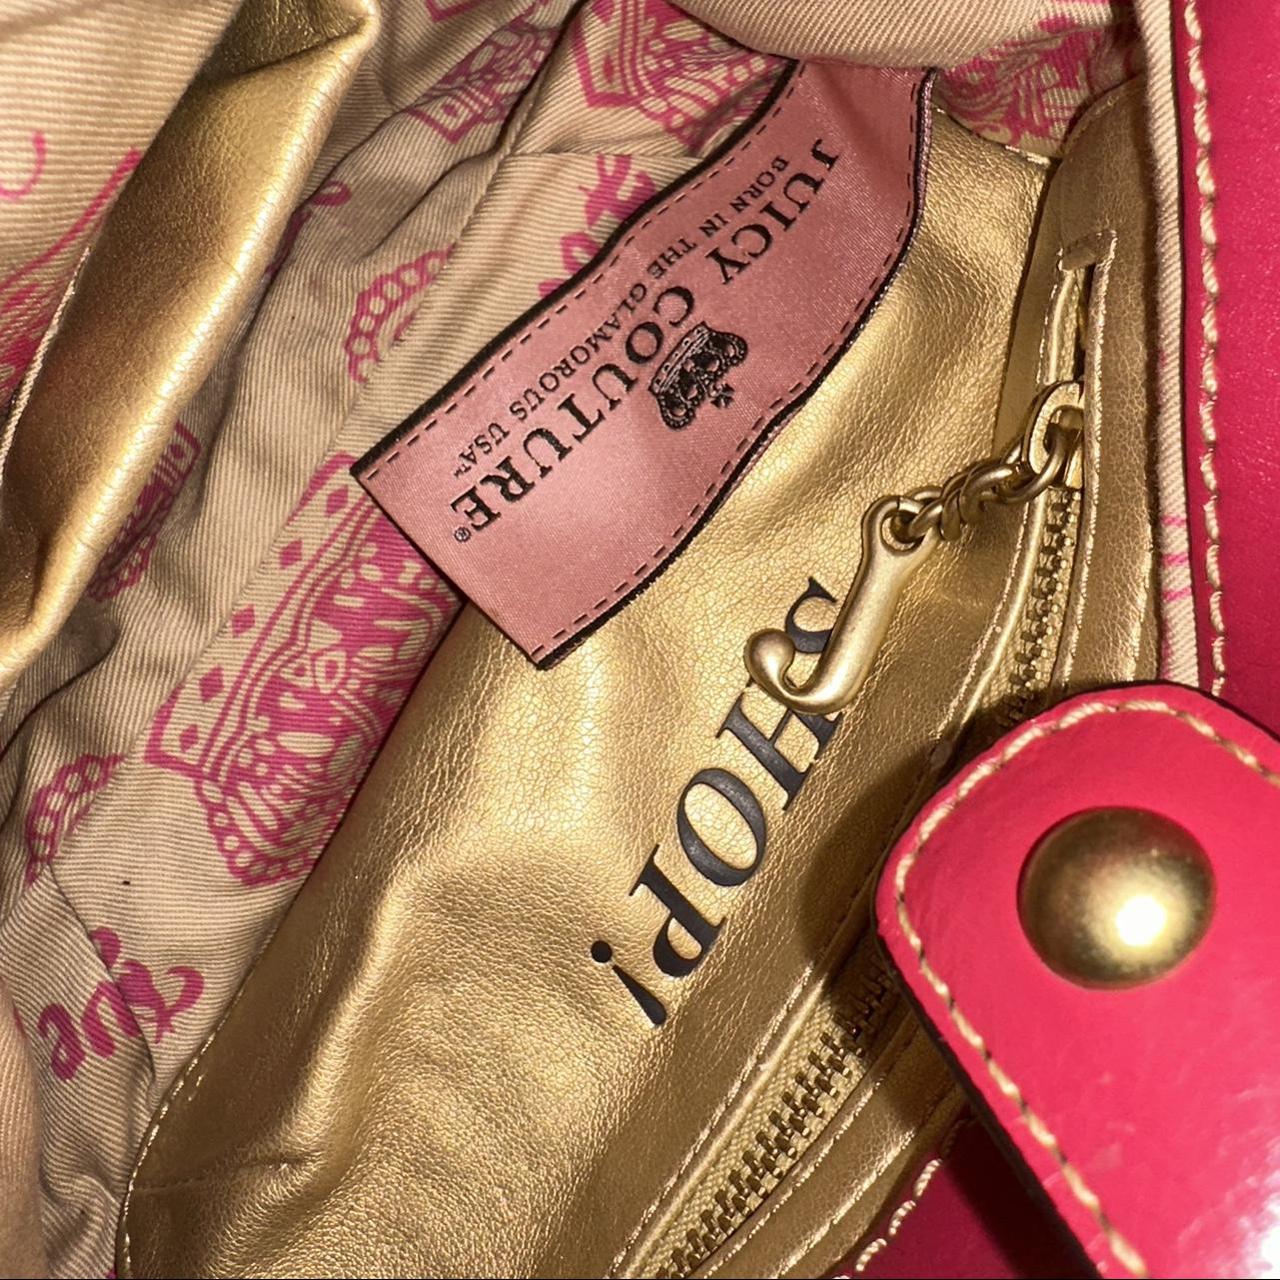 JUICY CULTURE Juicy Couture Velour Shoulder Bag With Metal Plaque In Hot  Pink for Women